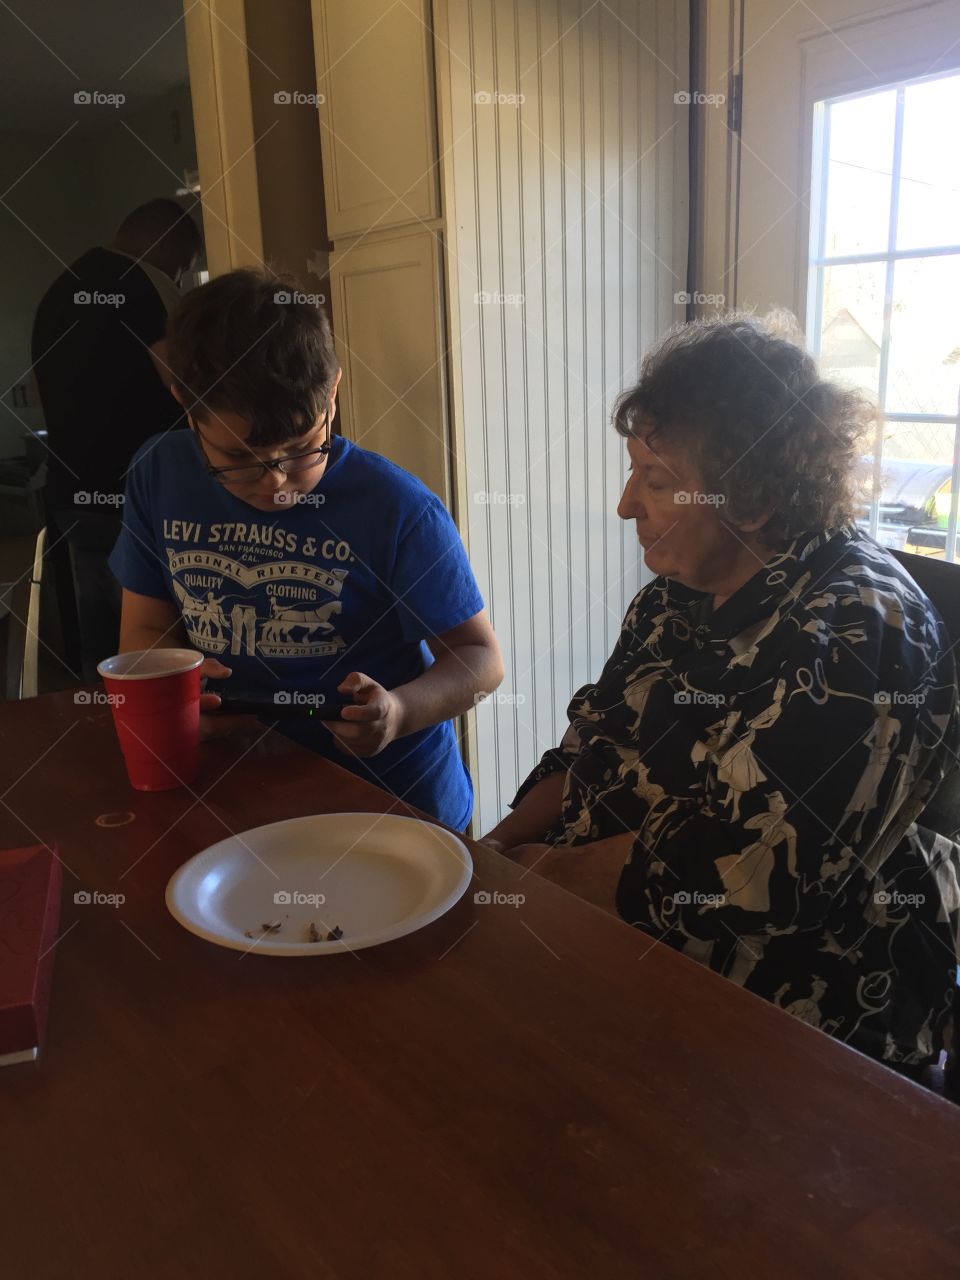 My grandmother, Anita Williams, chatting with my nephew, at a family gathering for the holidays.